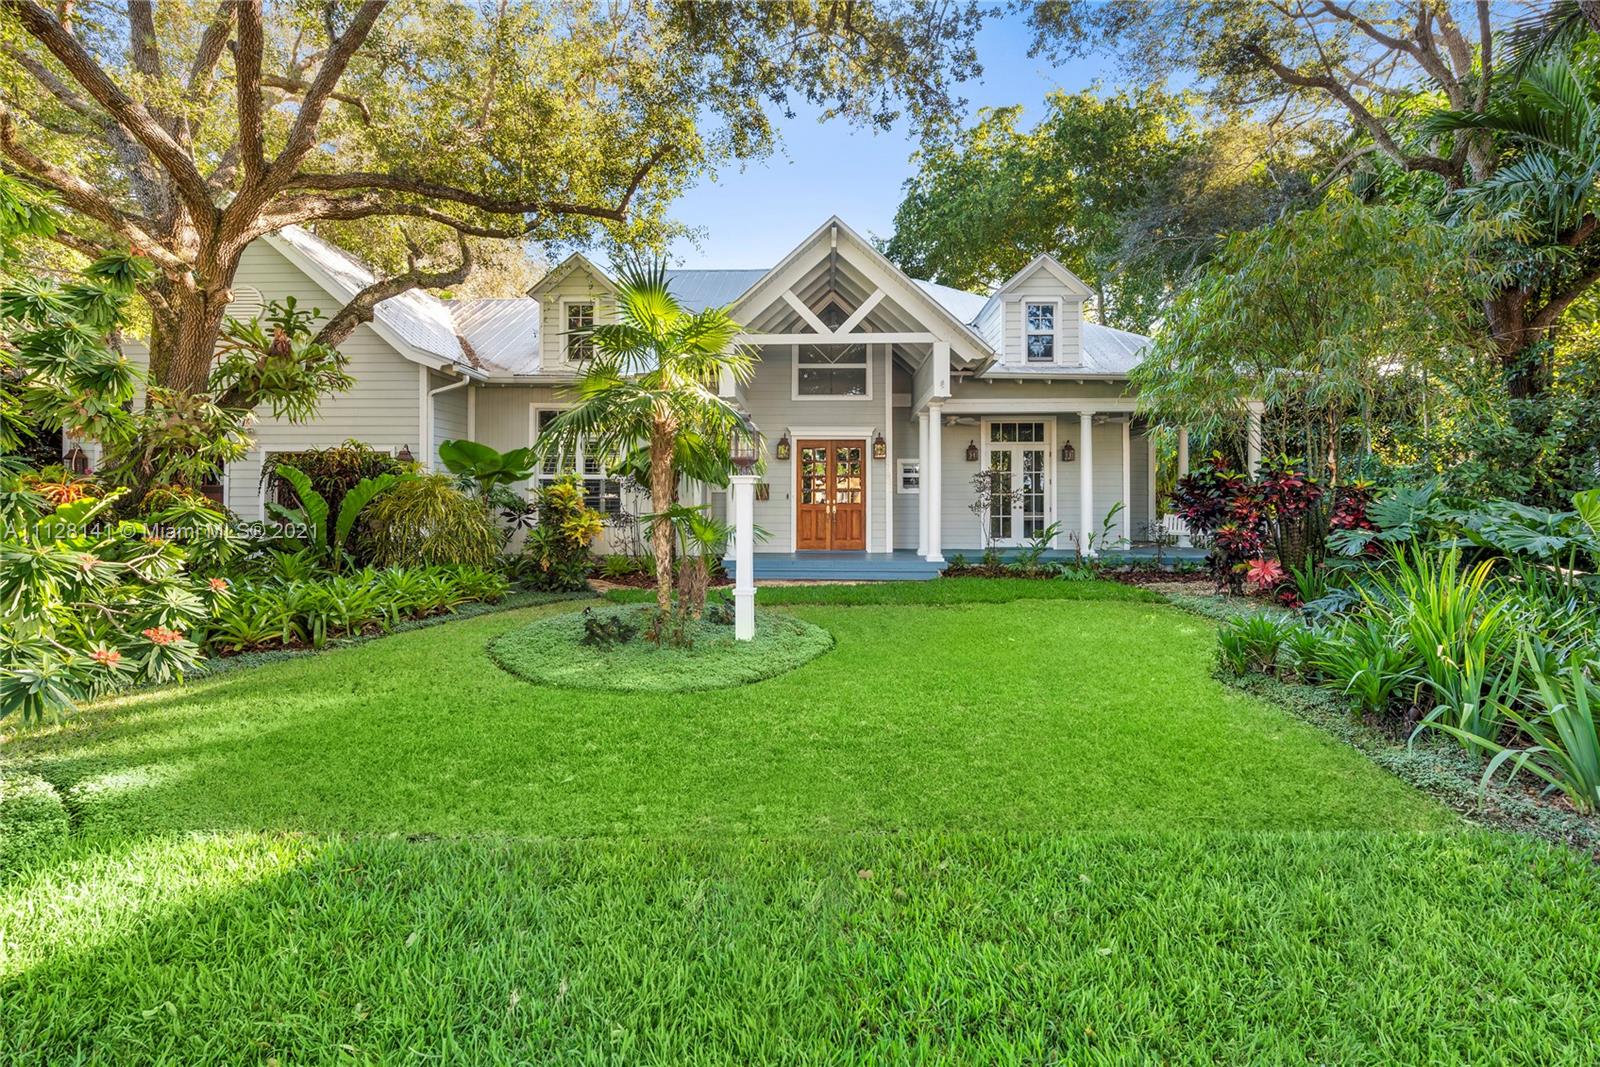 Gorgeous, graciously scaled Nantucket-style home in coveted, close-in High Pines. Wide, covered verandas invite indoor/outdoor SoFla living. Modern, pristine light-flooded interiors w/volume cypress ceilings, 5” plank teak floors, bespoke woodwork & craftsman finishes. Gourmet kitchen w/top-tier appliances, gas cooktop & butler’s pantry; formal dining rm; great rm anchored by stately fireplace opens to loggia/summer kitchen & pool. Primary suite offers tropical garden/pool views; all bdrms en suite +office/optional bdrm; custom closet systems thru-out. Add’l rms include full laundry; vast, easy-access attic. Oversized 2-car garage w/safe rm; Chicago brick driveway, paths & patio; 16K generator. Mature oaks & palms frame the distinctive residence. Mere blocks to shops, dining, parks & more!